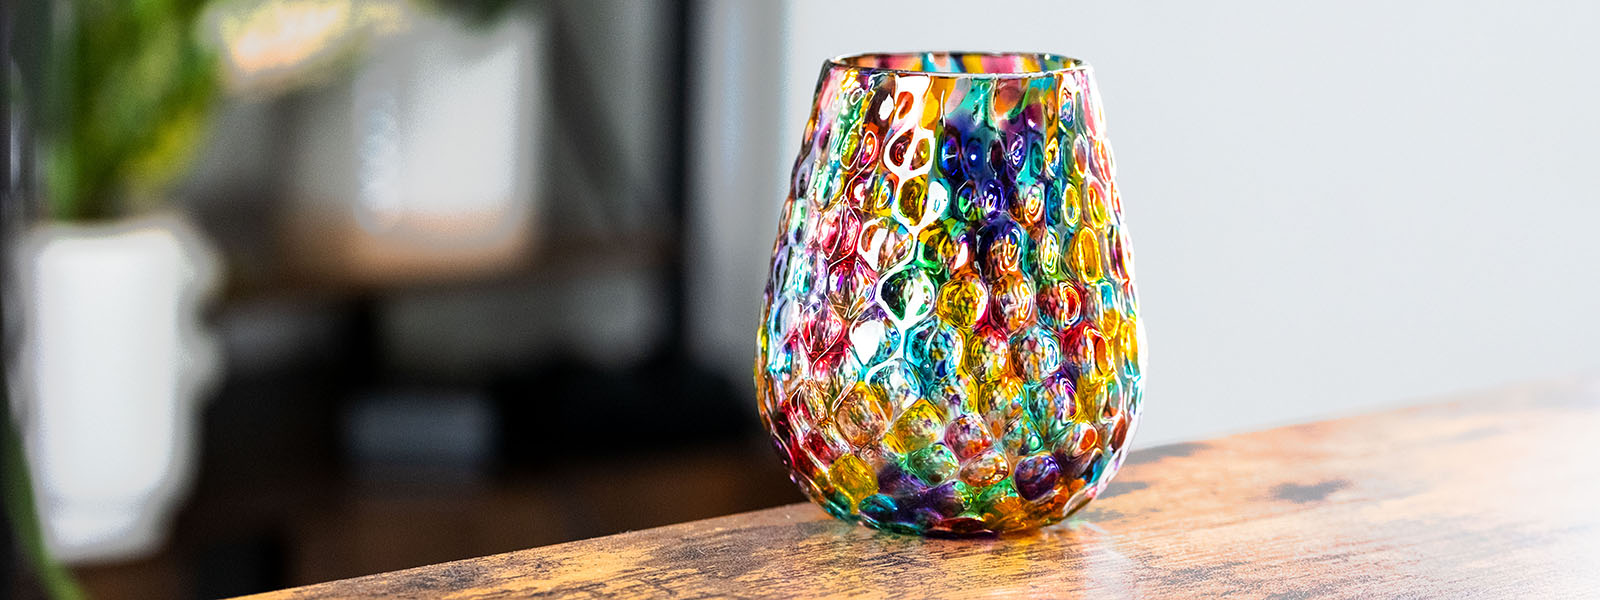 Cup of Many Colors